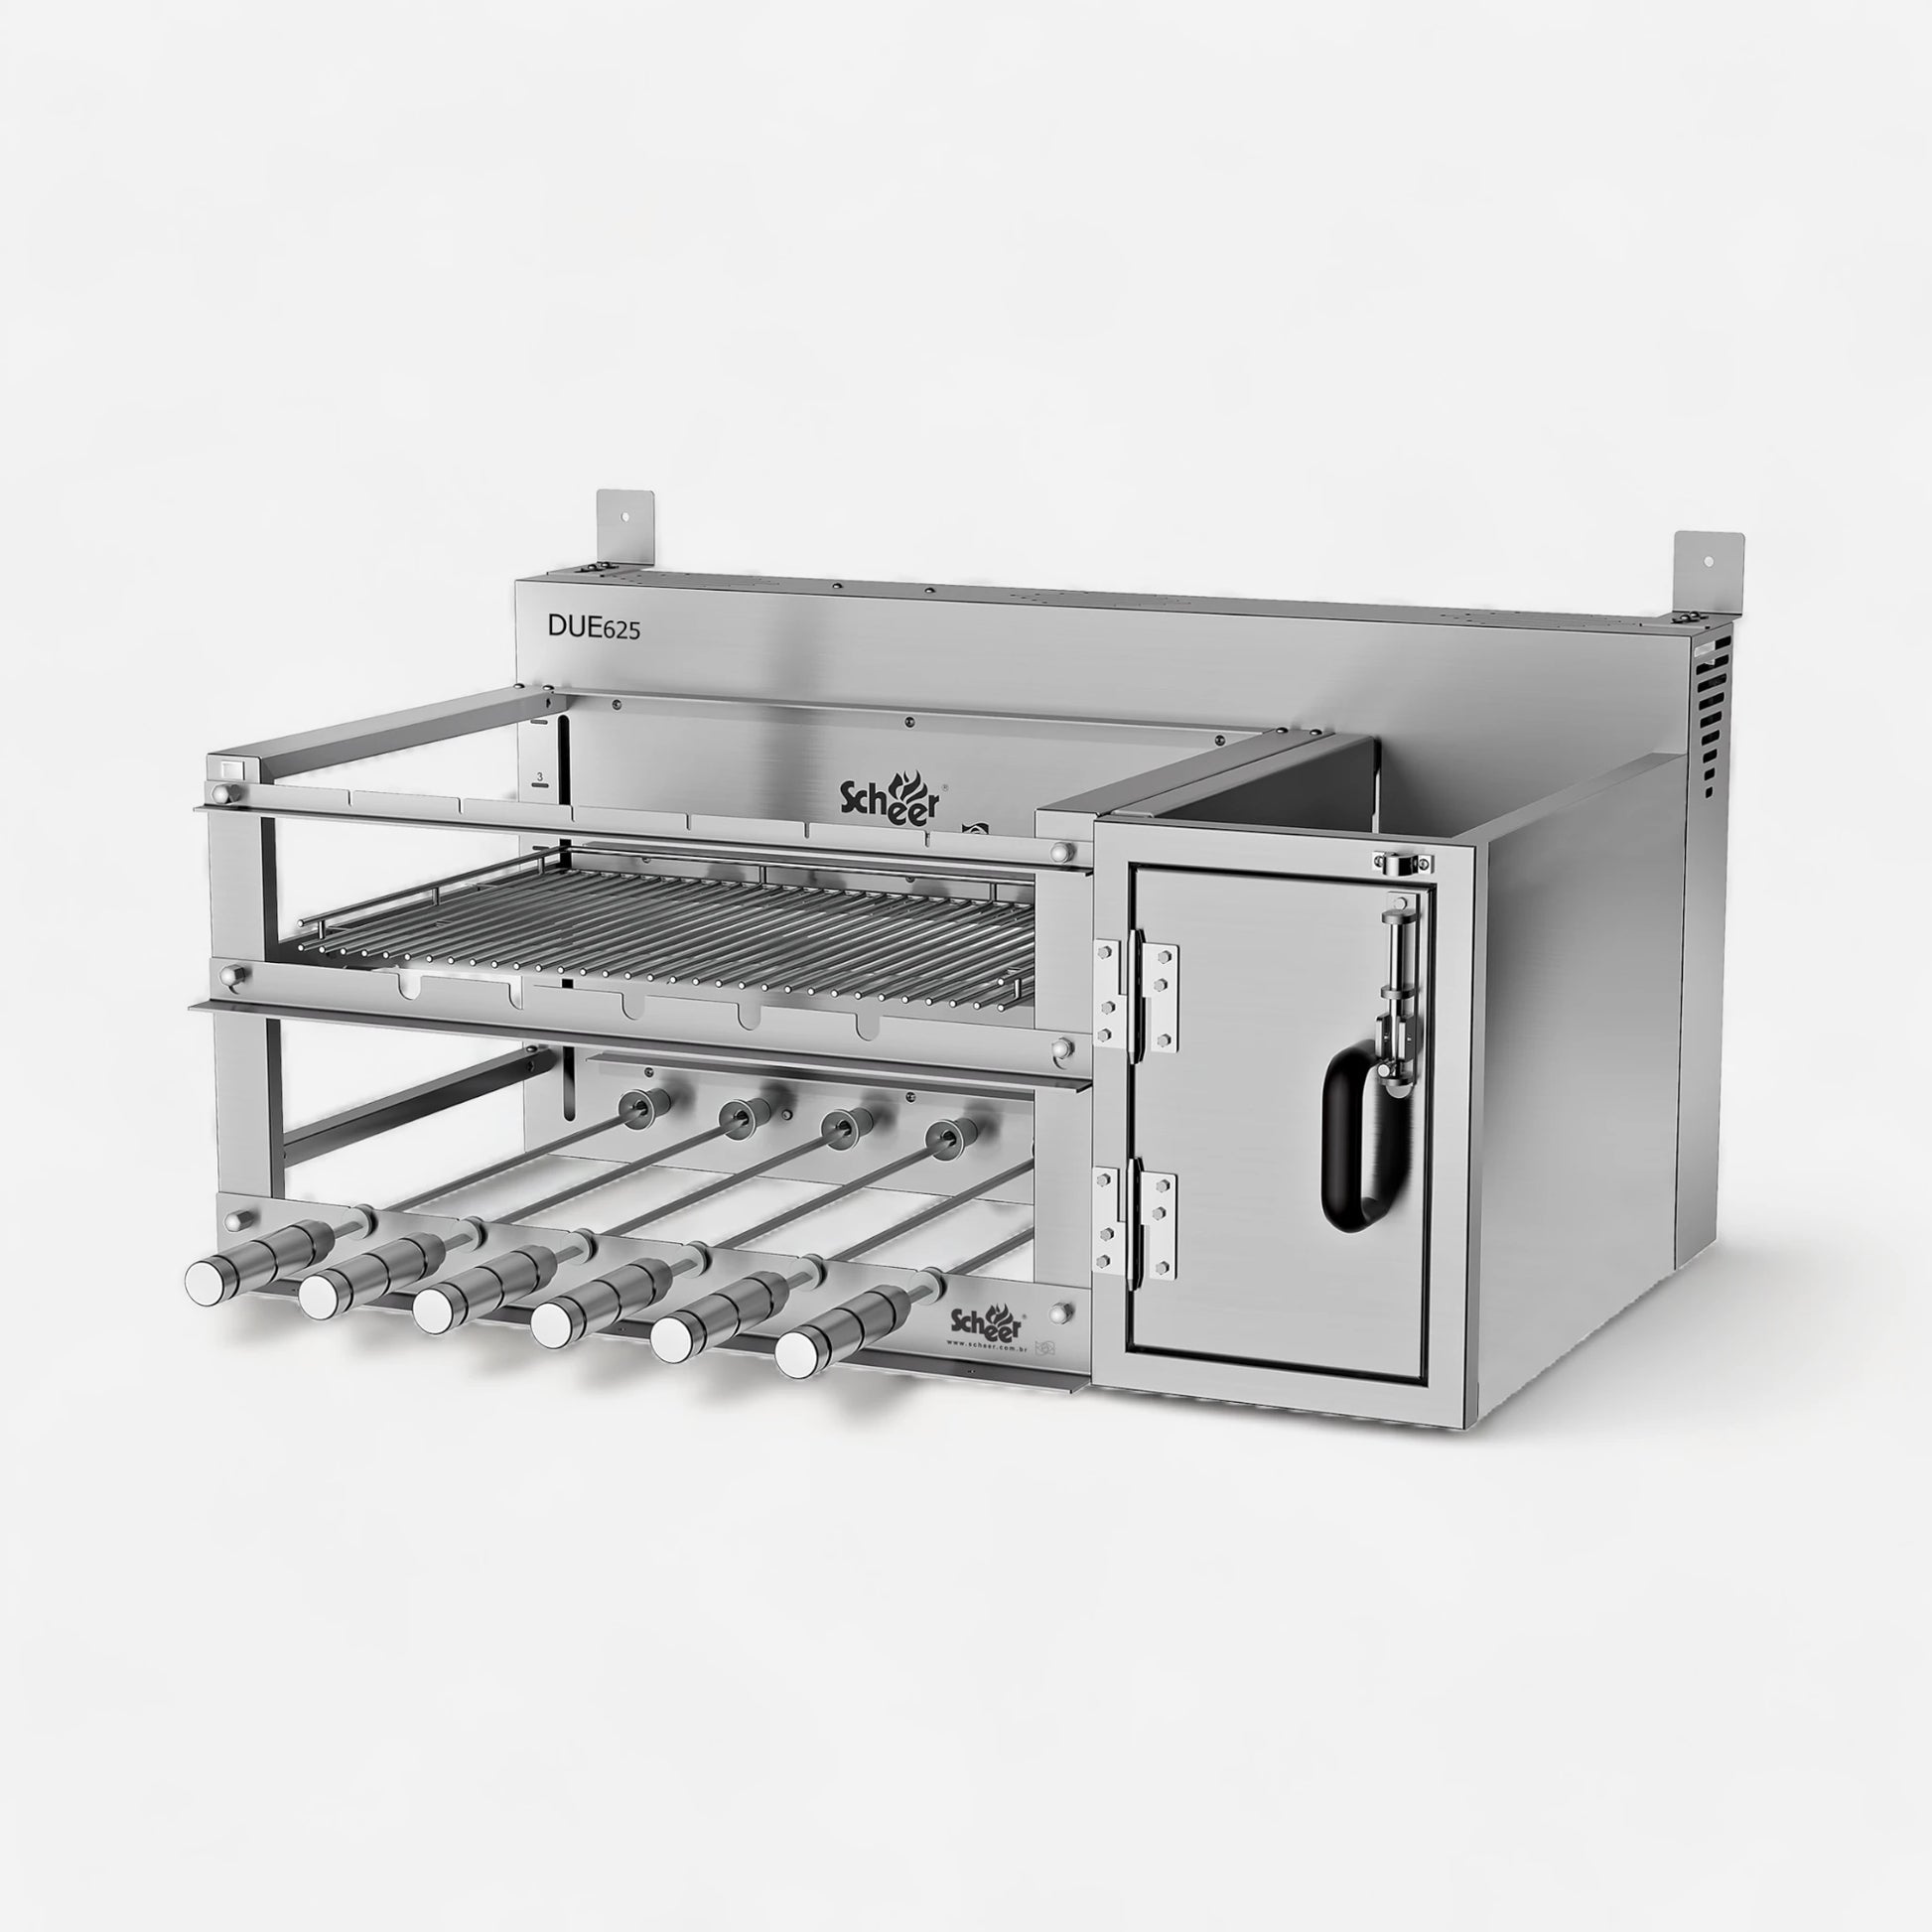 Due 625 model with automatic Parrilla lift grill and automatic turning Rotisserie skewers and side refractory Firebox for wood burning to make charcoal. Stainless steel 304.